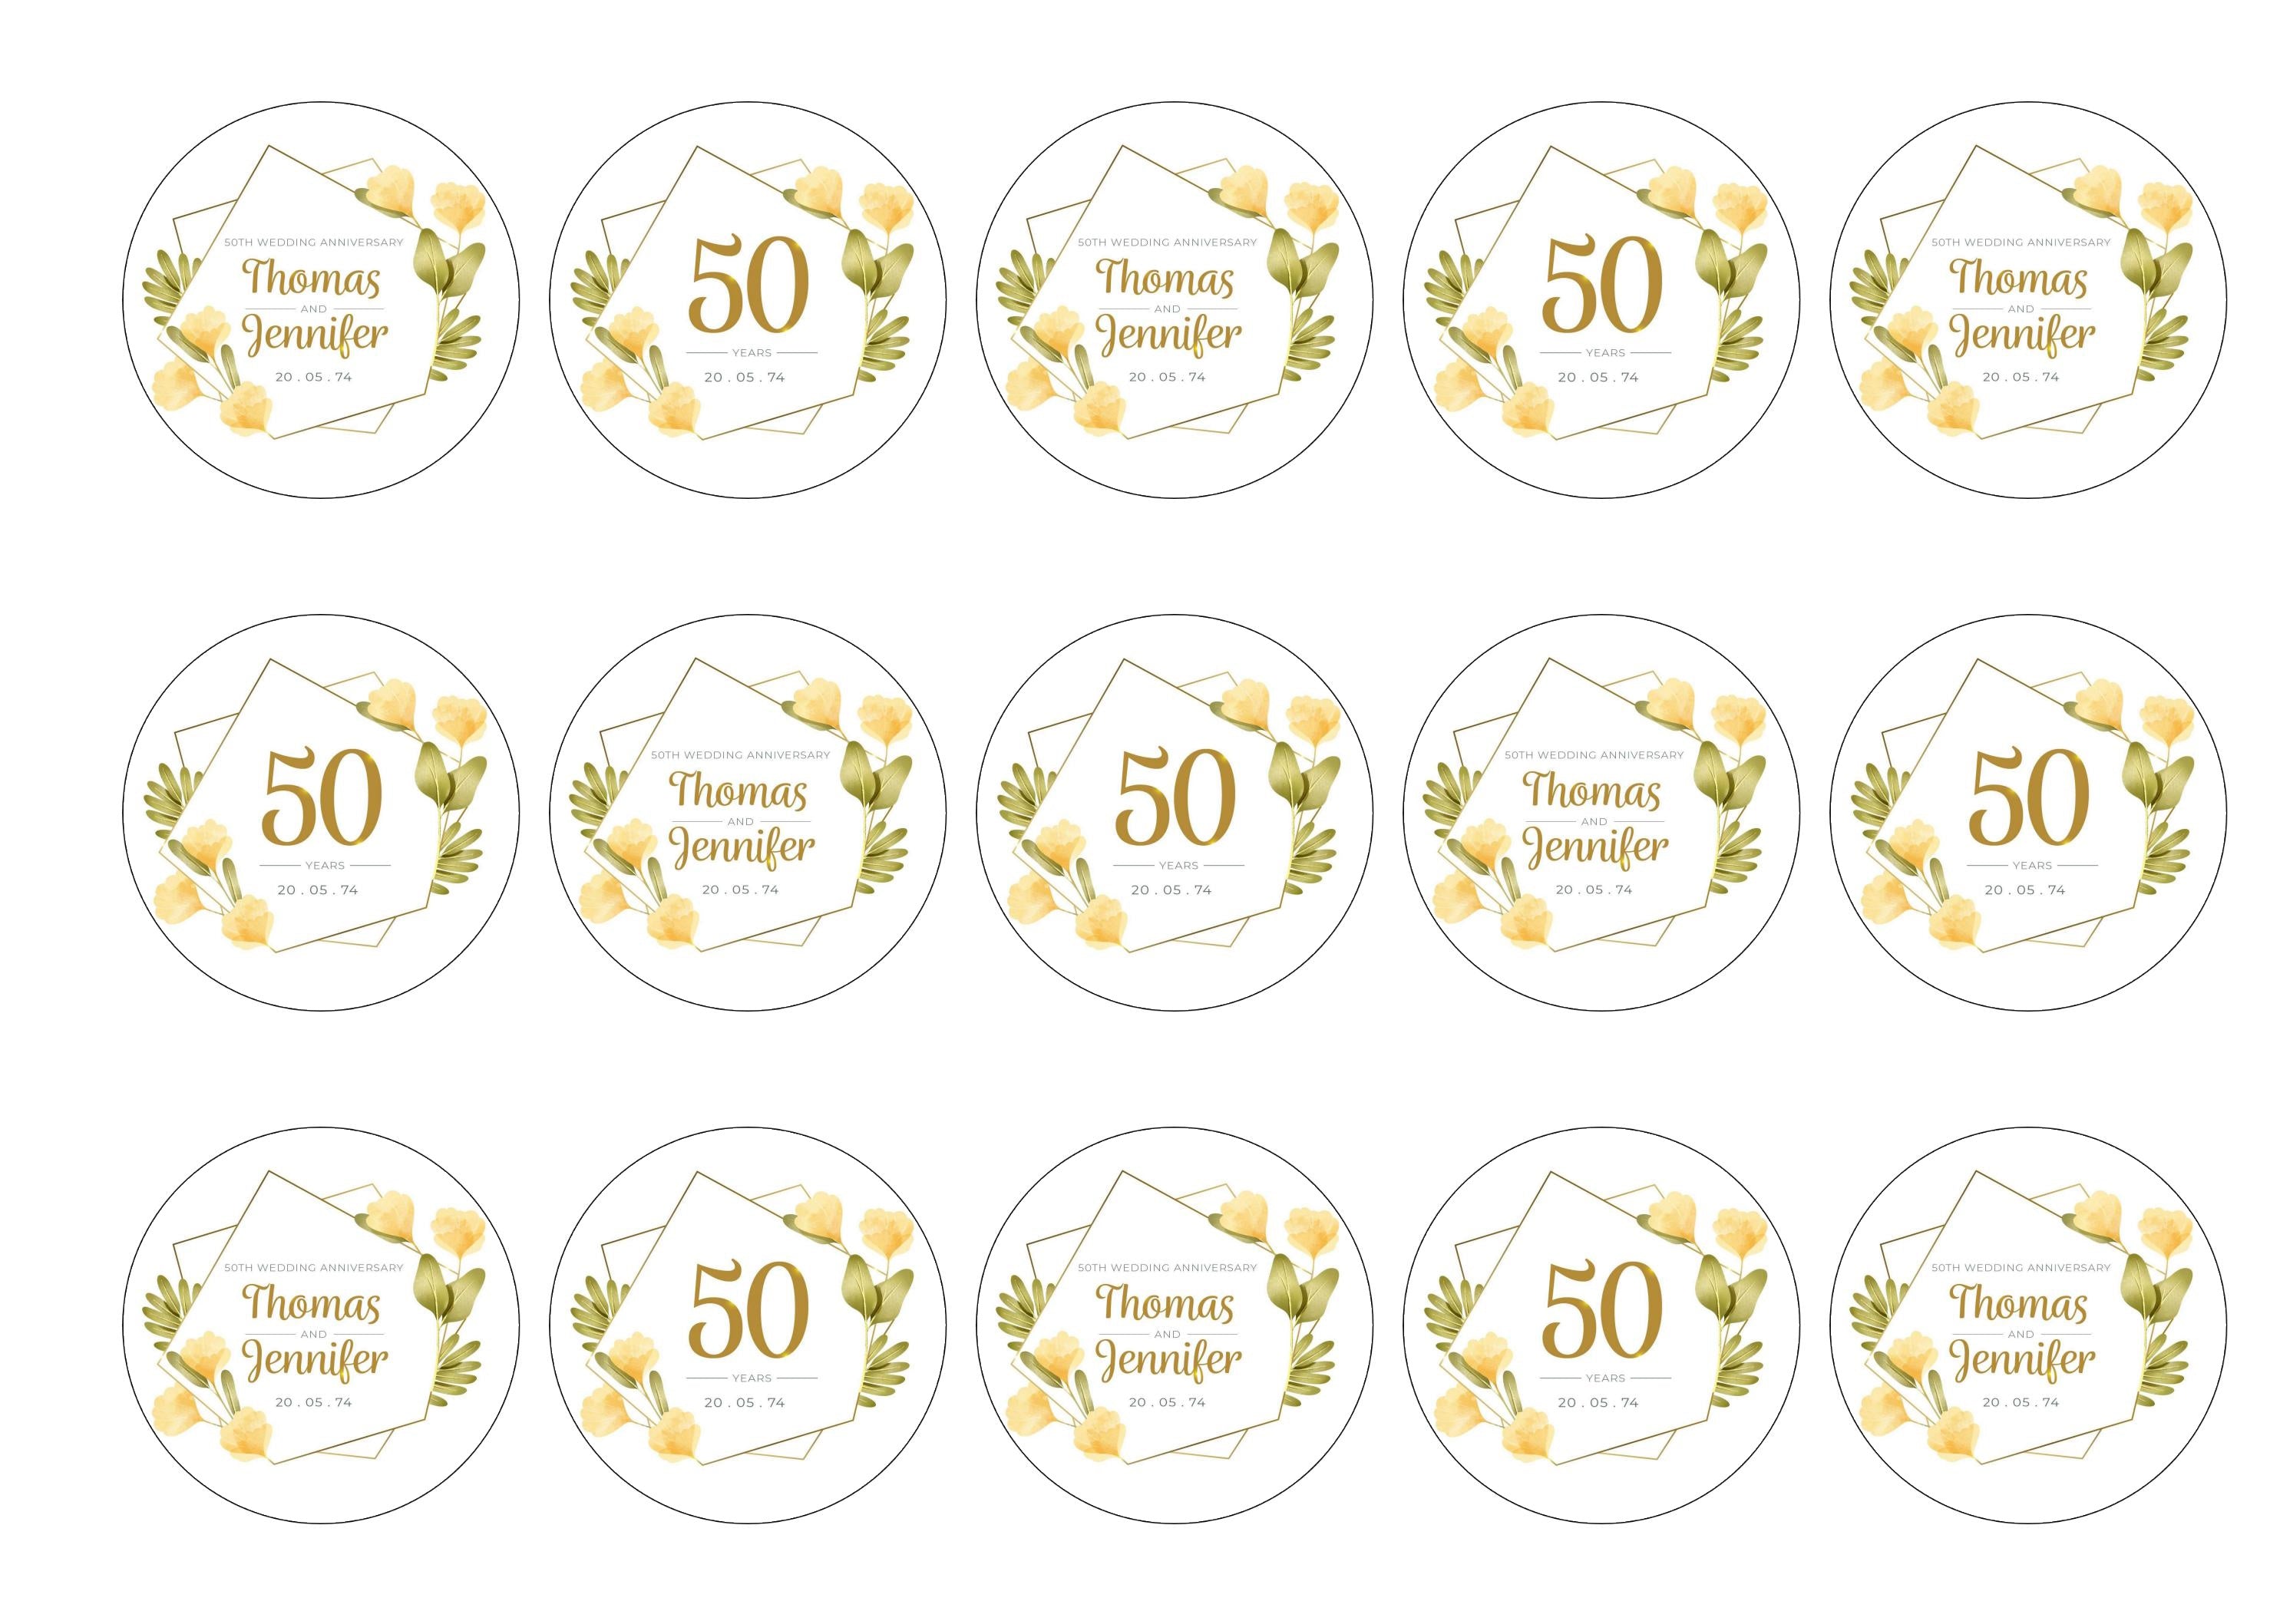 15 peronalised cupcake toppers with a floral border to celebrate a 50th wedding anniversary